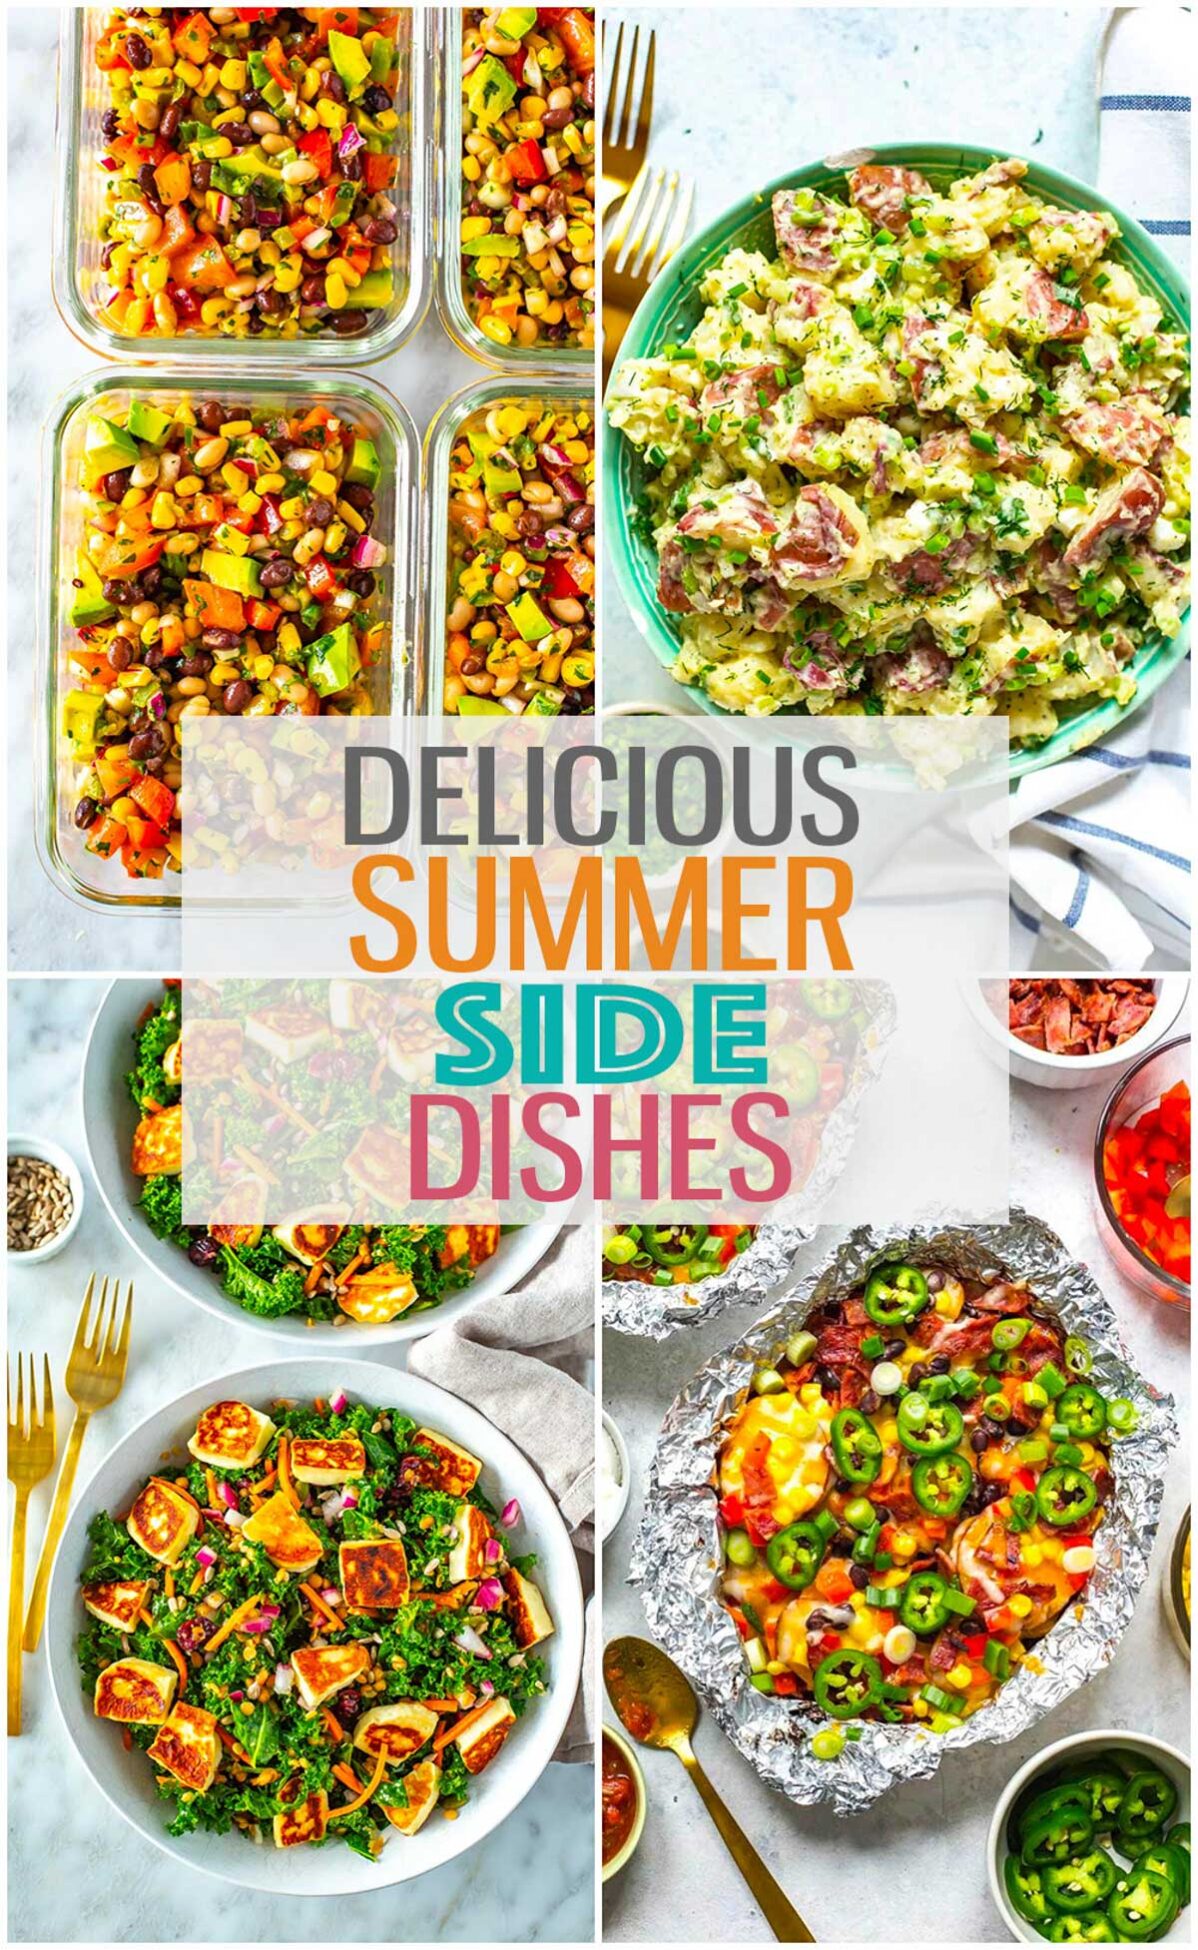 A collage of 4 different summer sides with the text "Delicious Summer Side Dishes" layered over top.